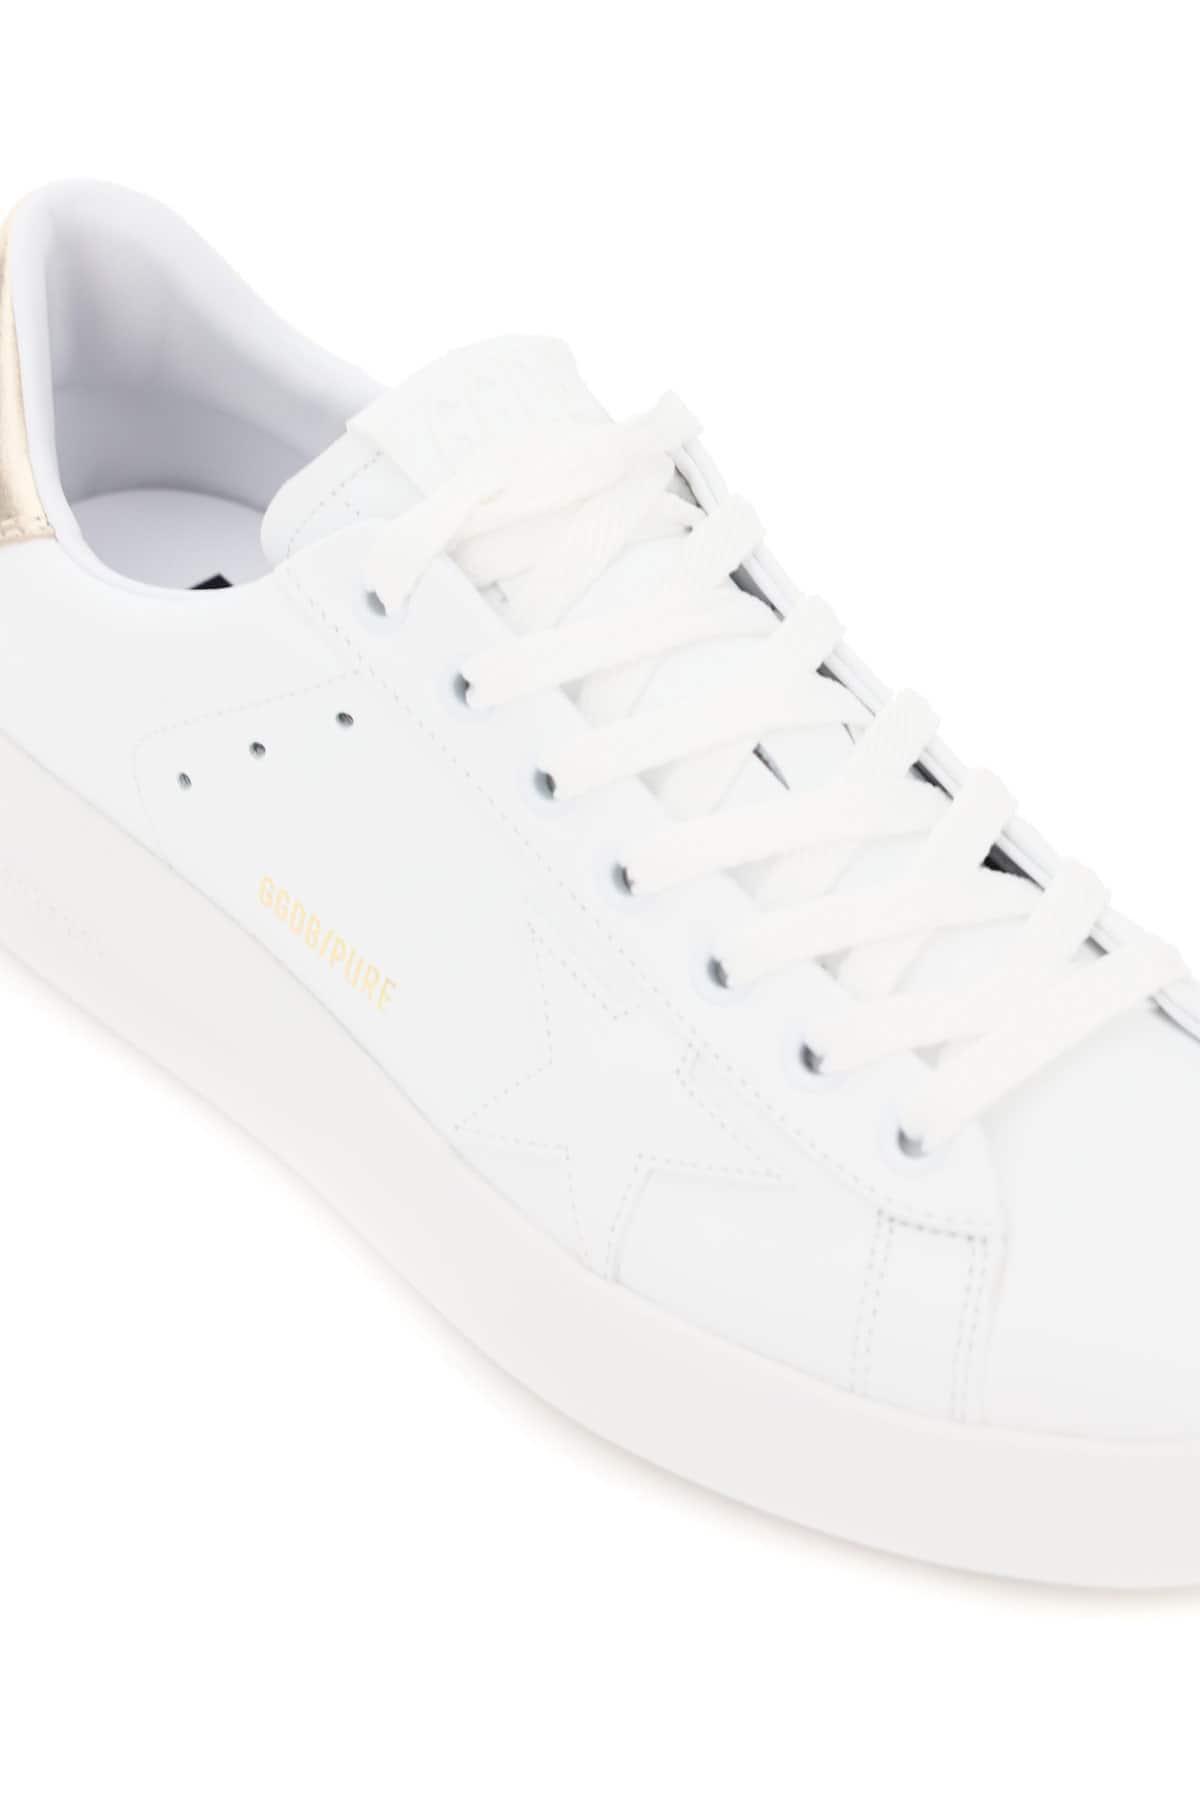 Golden Goose Goose Purestar Sneakers in White,Gold (White) - Lyst